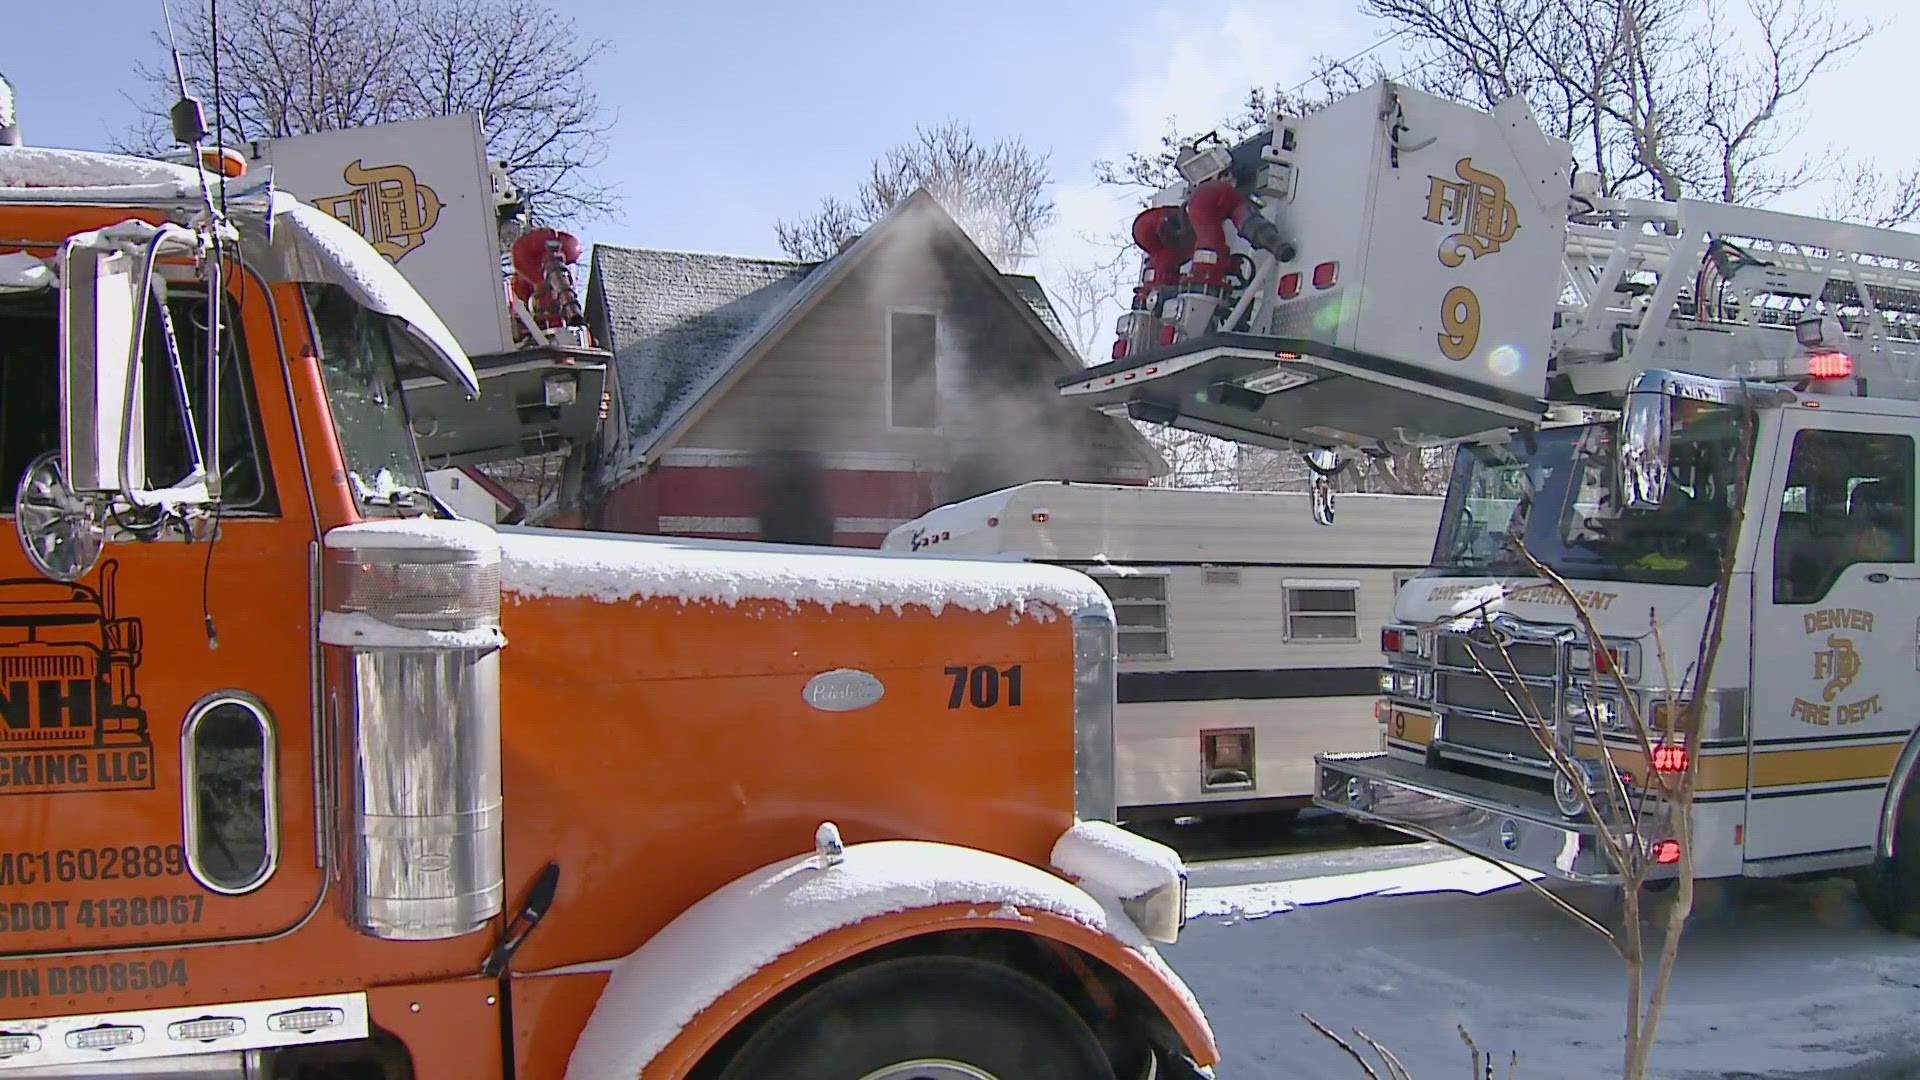 Denver Fire said the fire near the intersection East 47th Avenue and Williams Street was upgraded to a second alarm because of cold weather conditions.